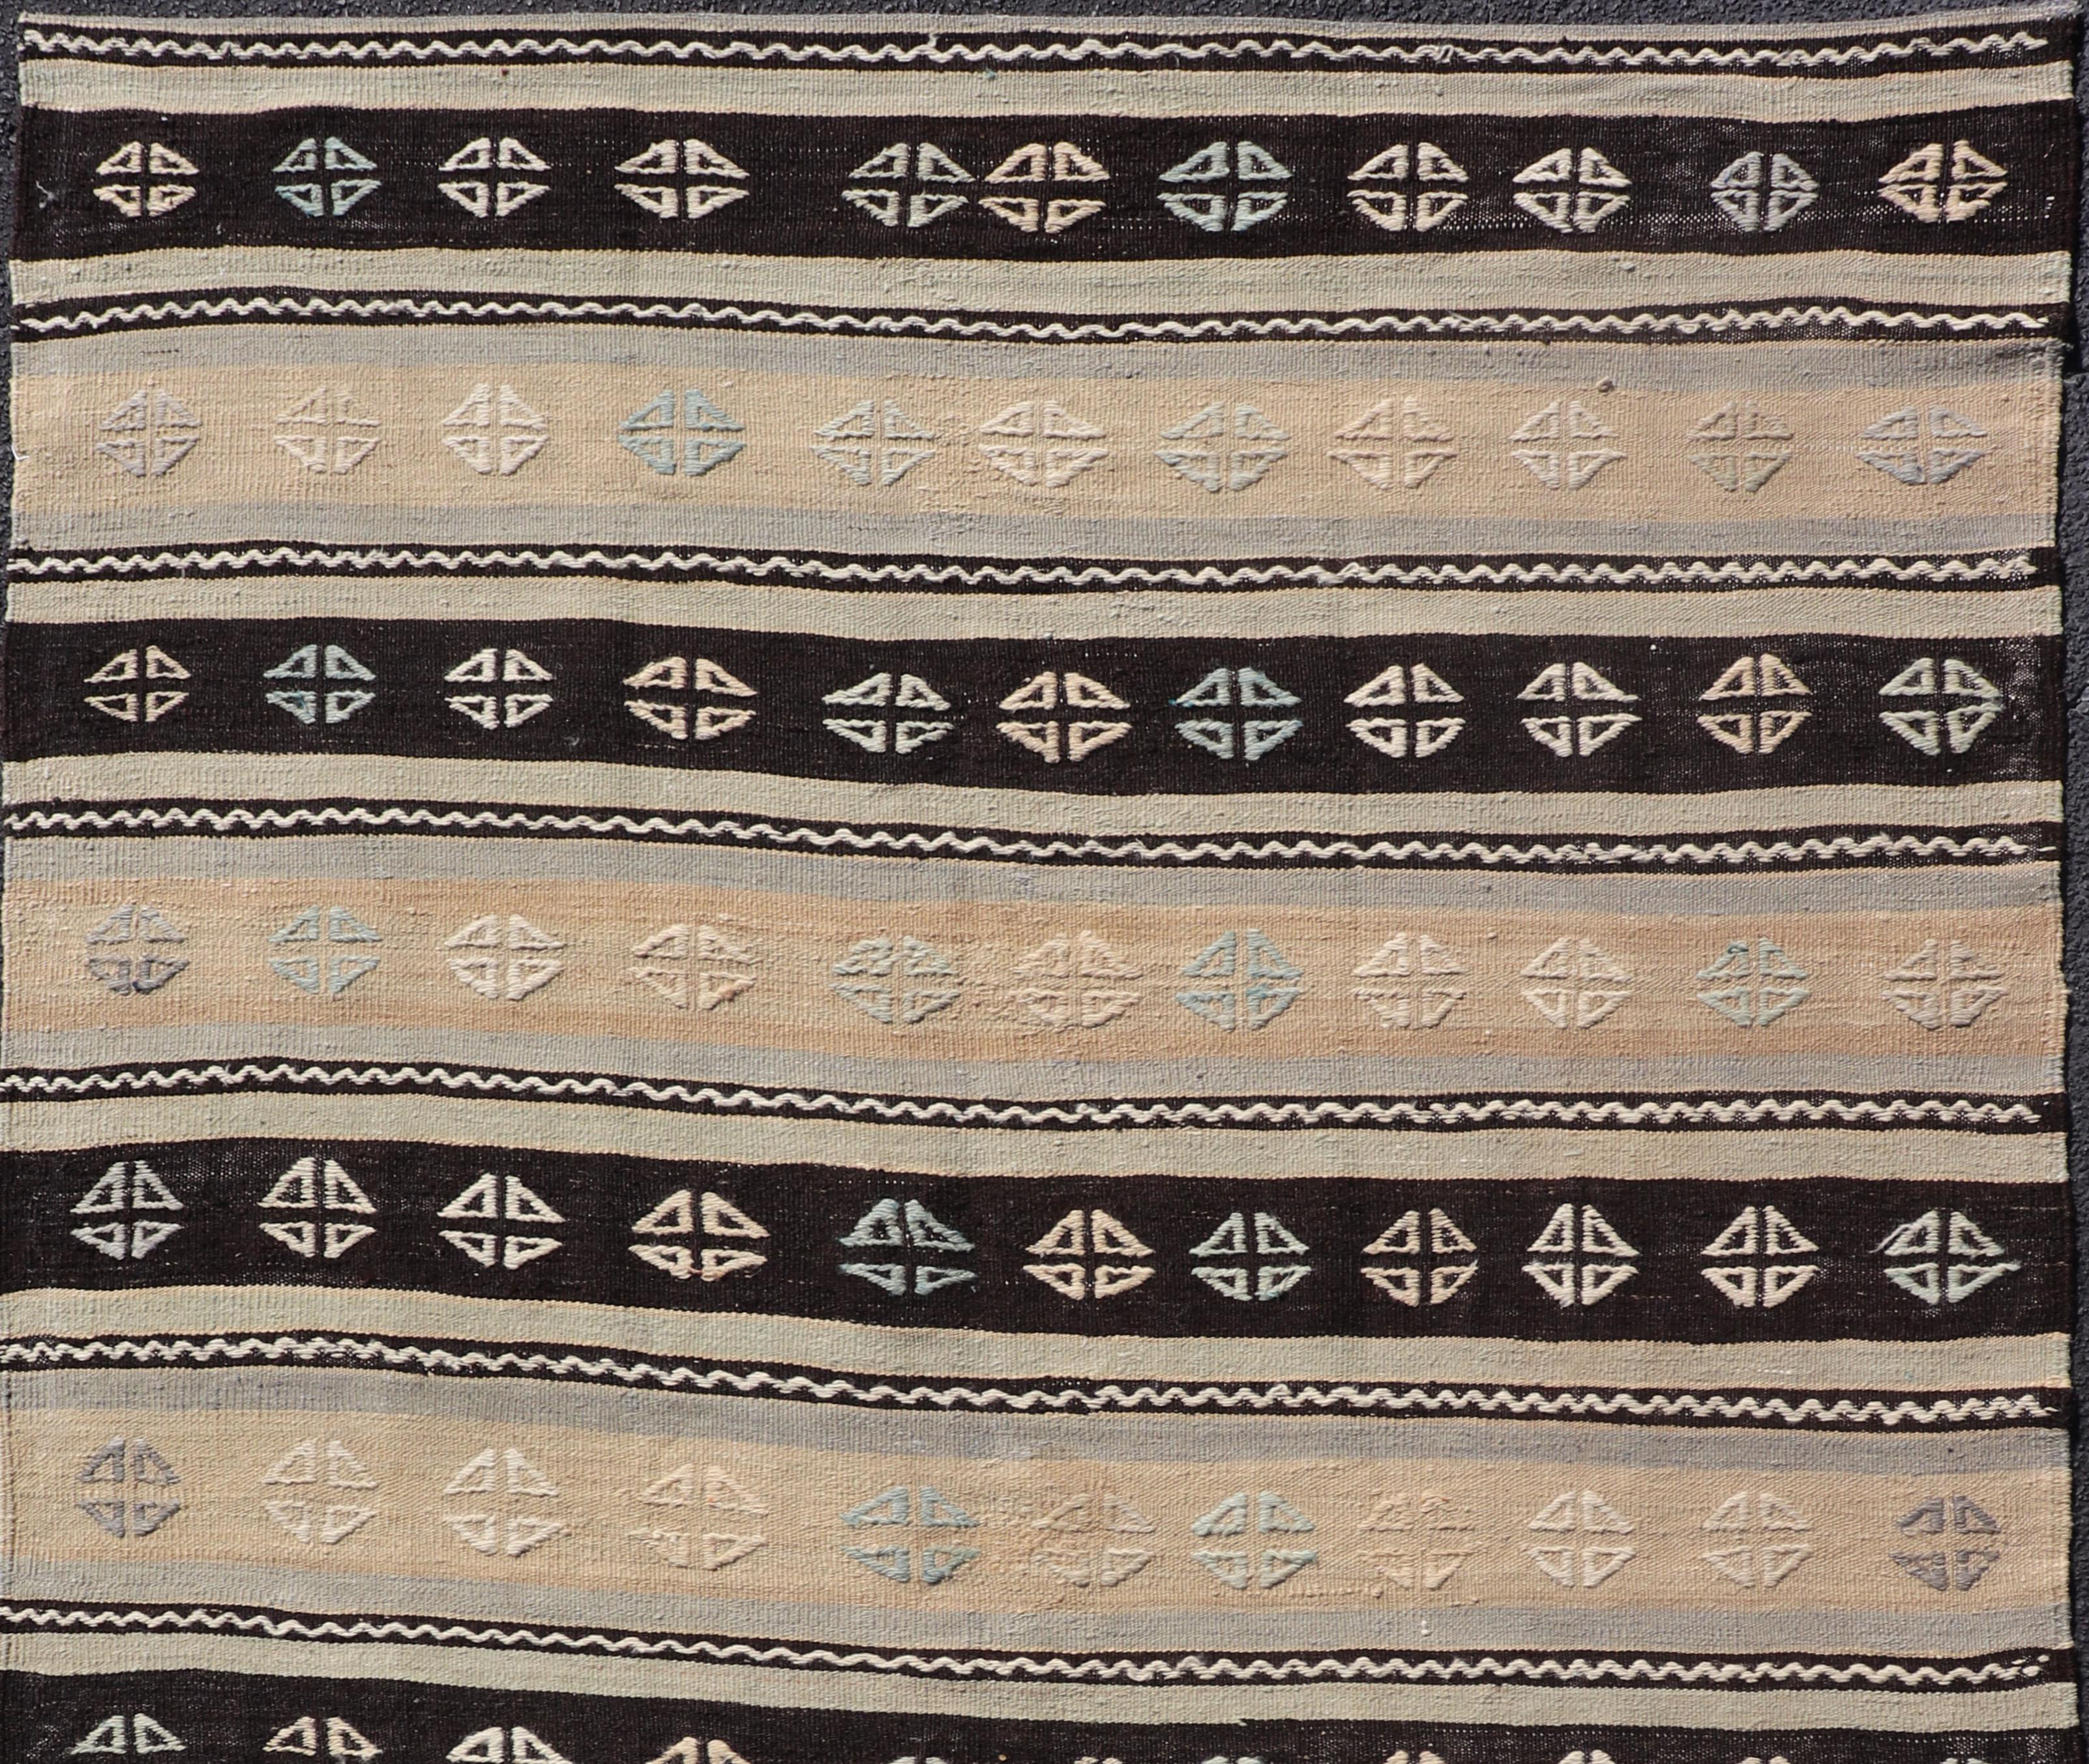 Hand-Woven Vintage Hand Woven Turkish Tribal Kilim with Stripes and Tribal Motifs